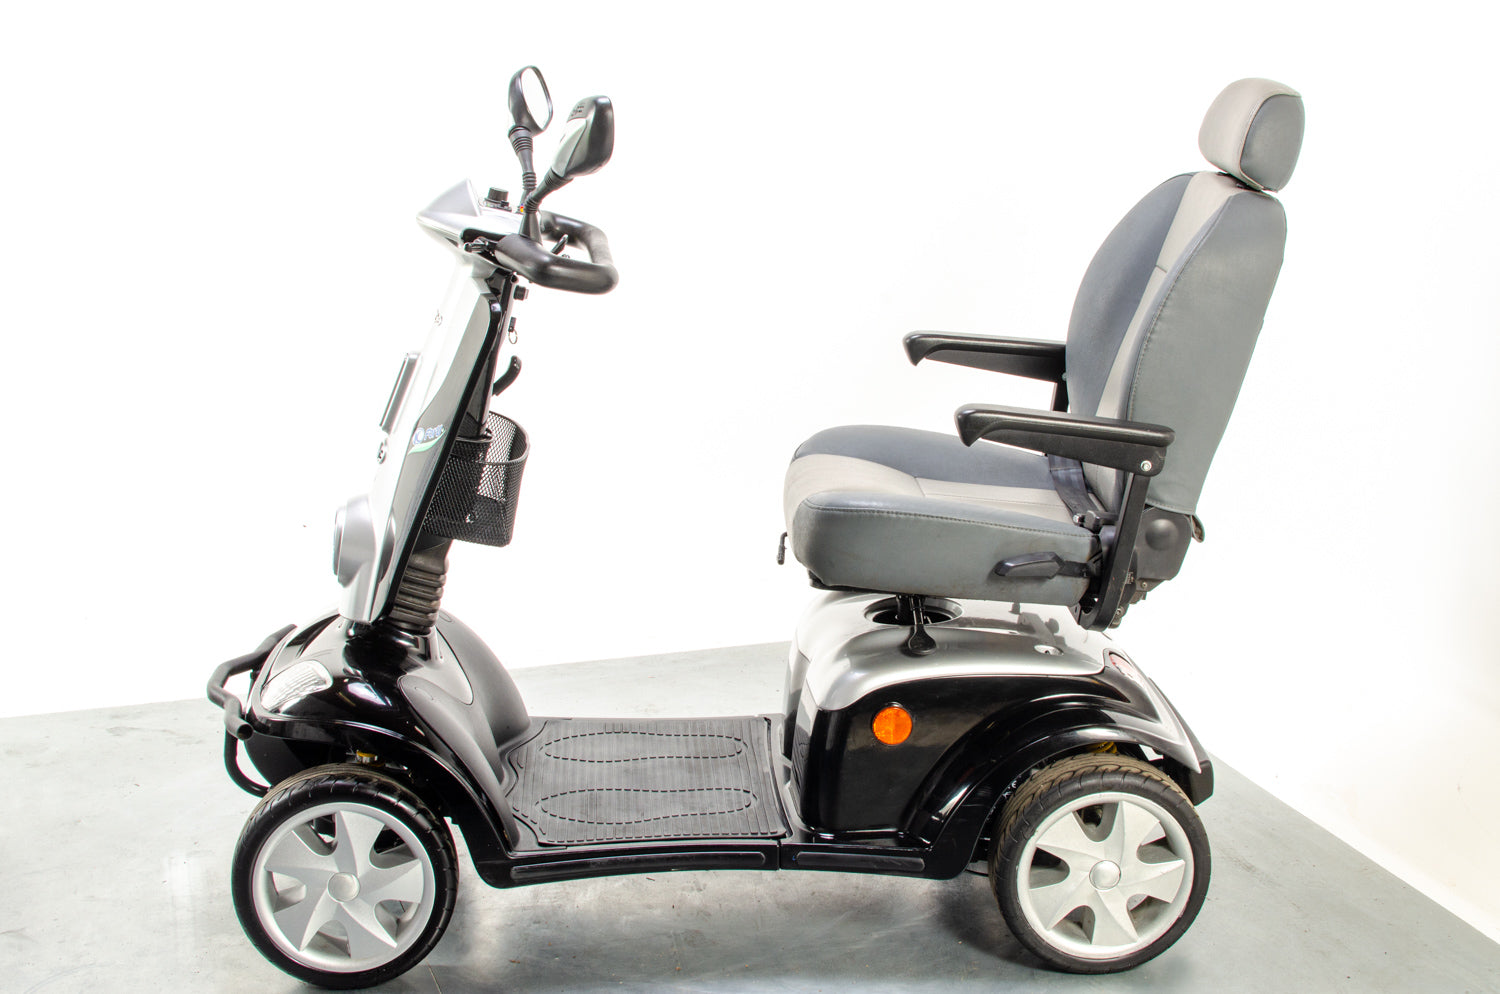 Kymco Maxi XLS Used Mobility Scooter Large All-Terrain 8mph Suspension